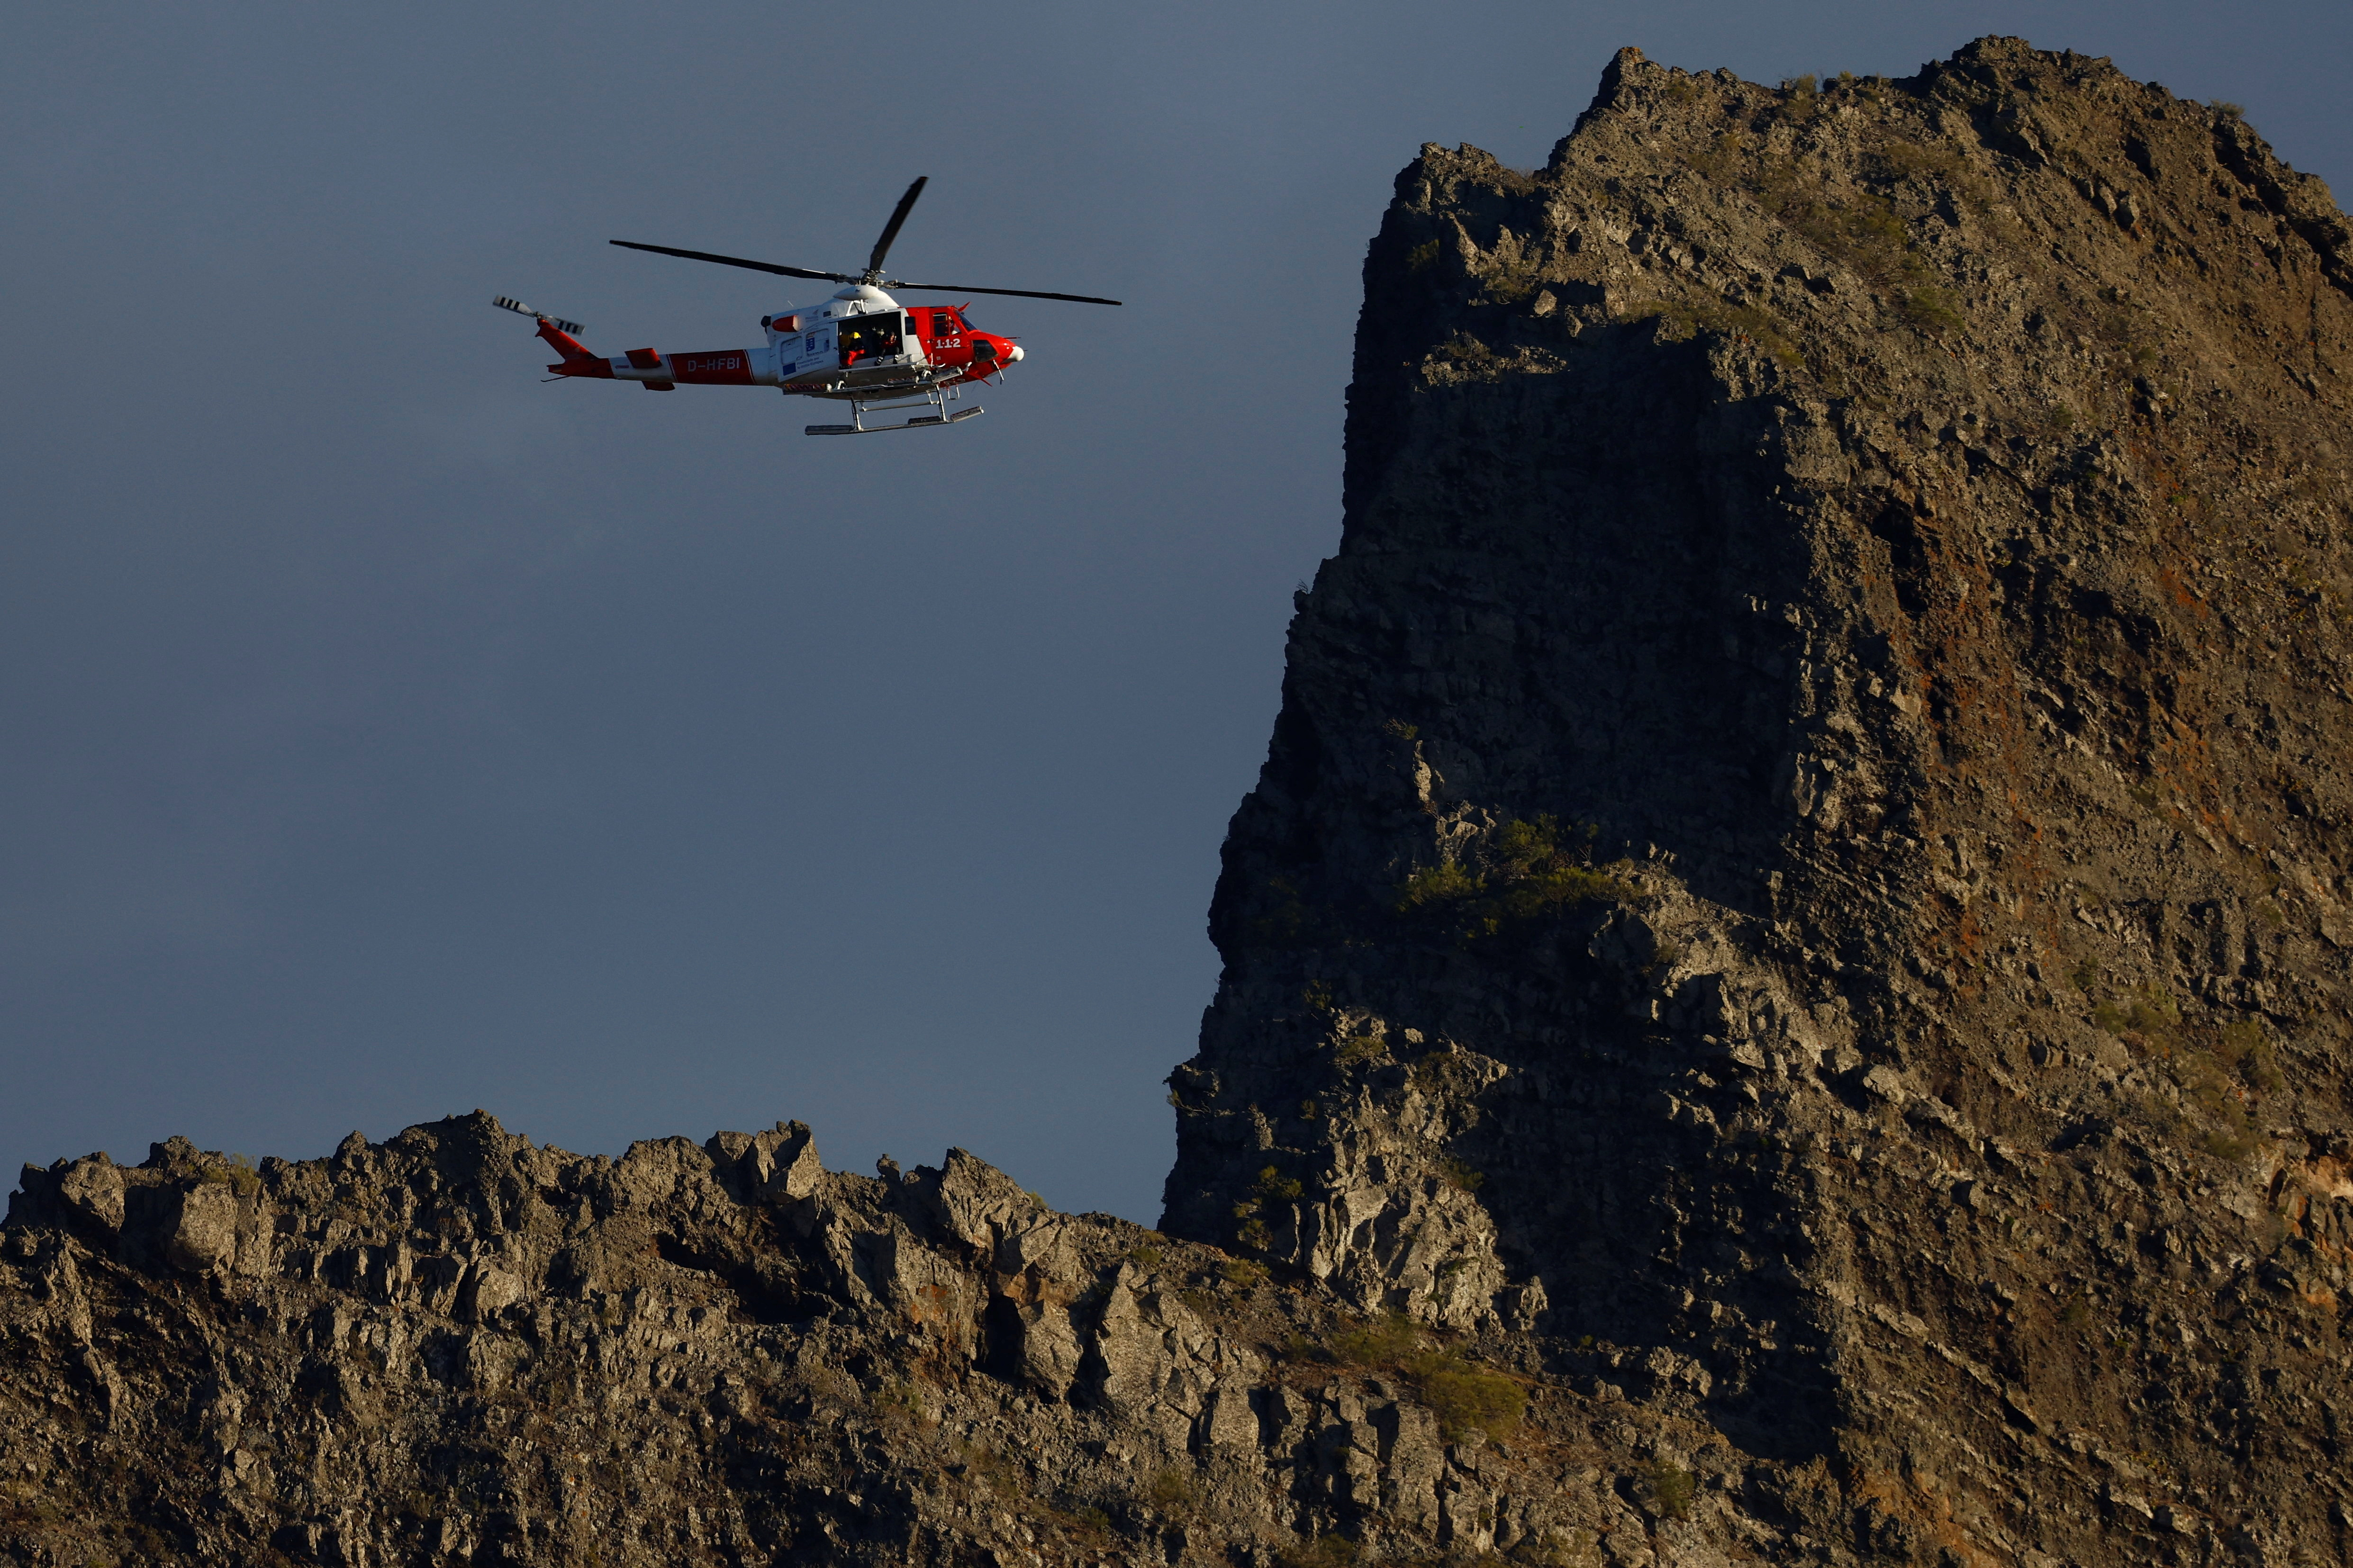 A rescue helicopter searches for a young British man who disappeared in the Masca ravine, on the island of Tenerife